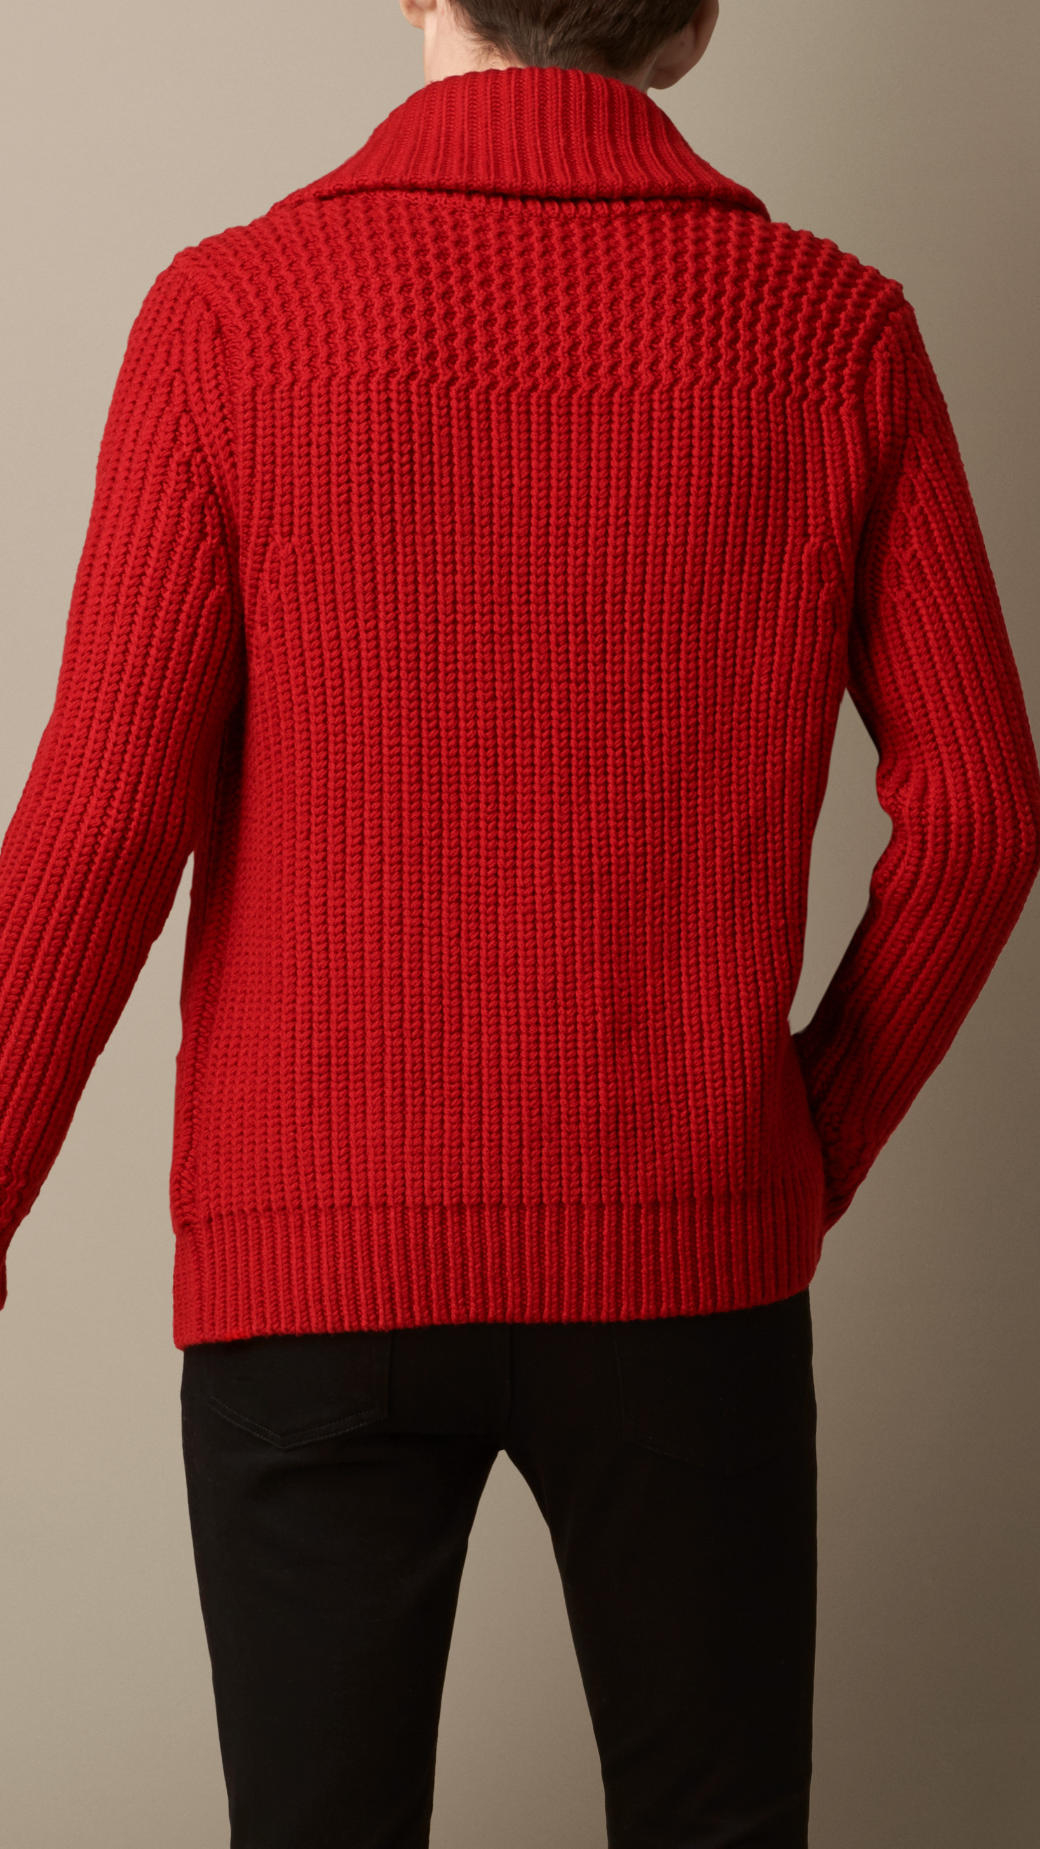 Lyst - Burberry Shawl Collar Cardigan in Red for Men